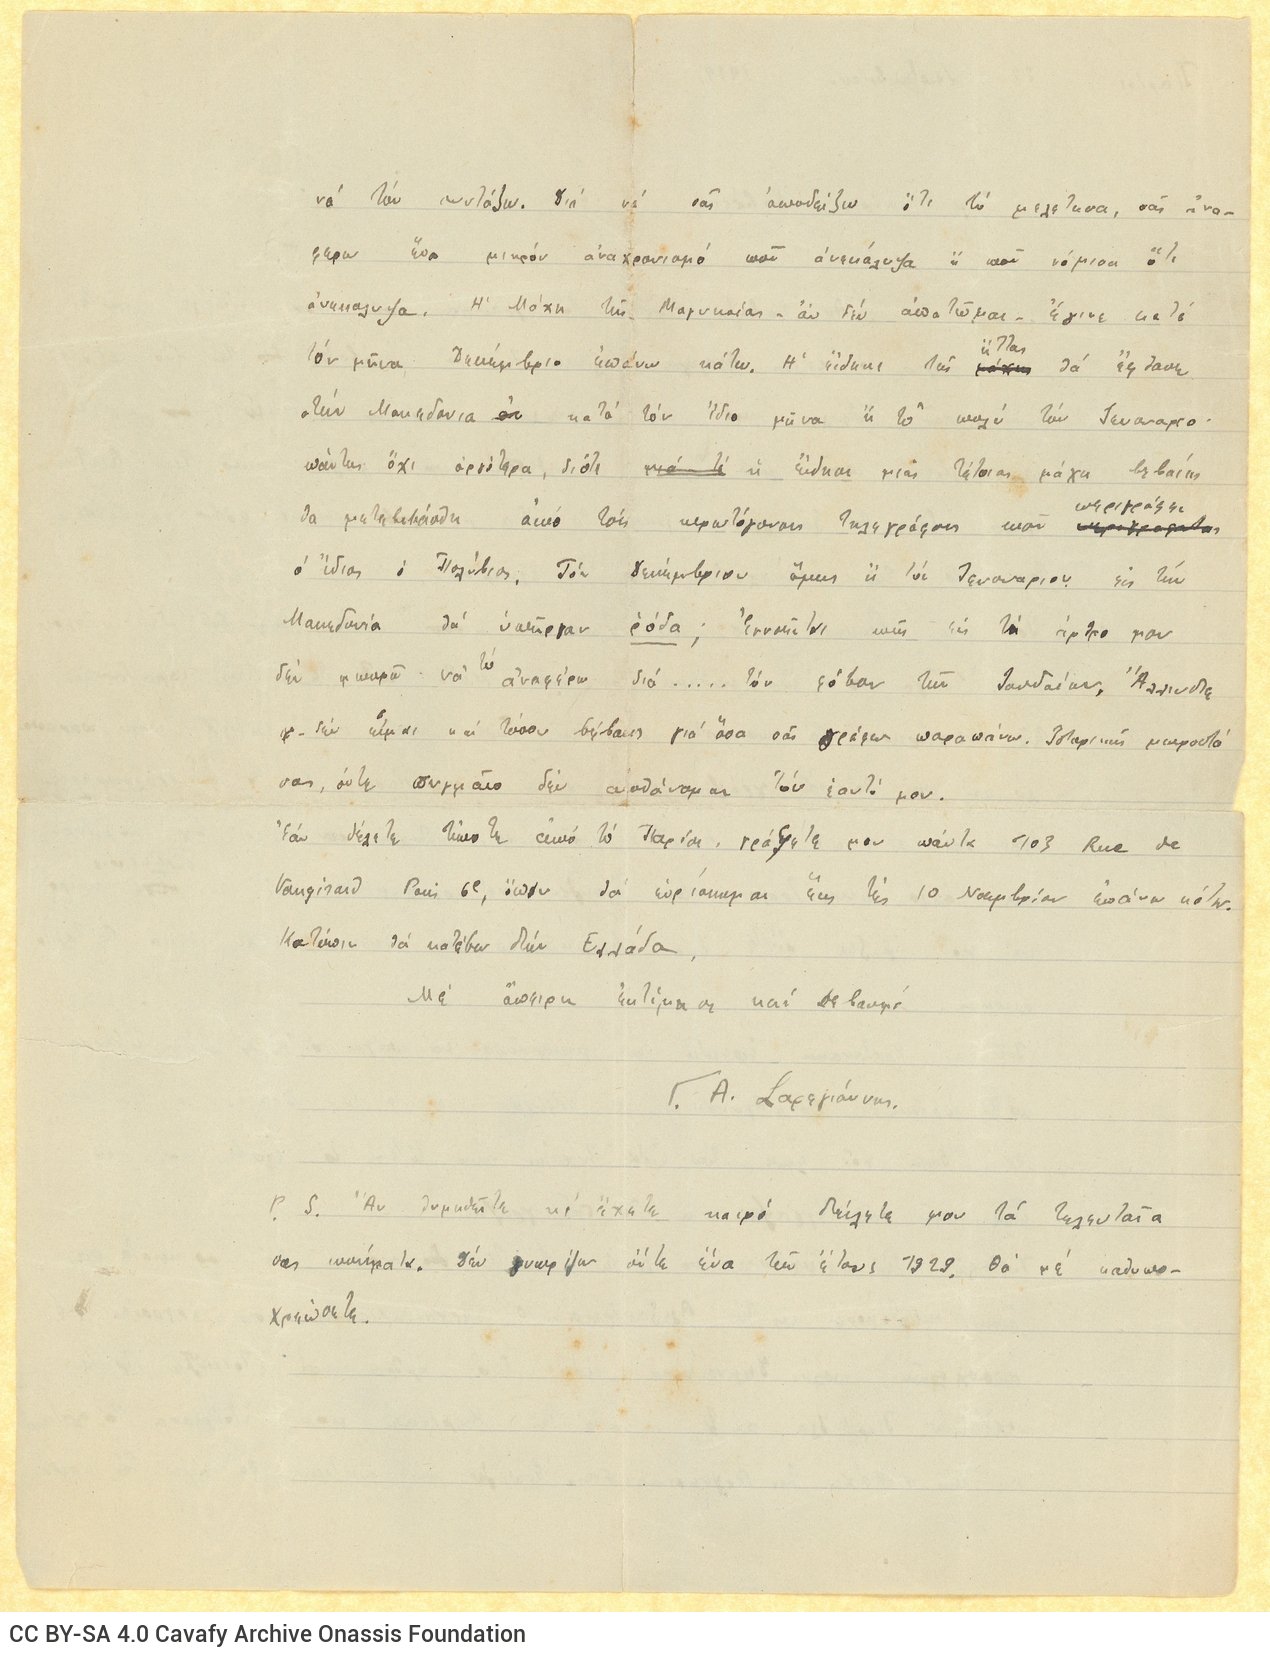 Handwritten letter by Giannis A. Saregiannis to Cavafy on both sides of a ruled sheet. He informs him that he handed collecti